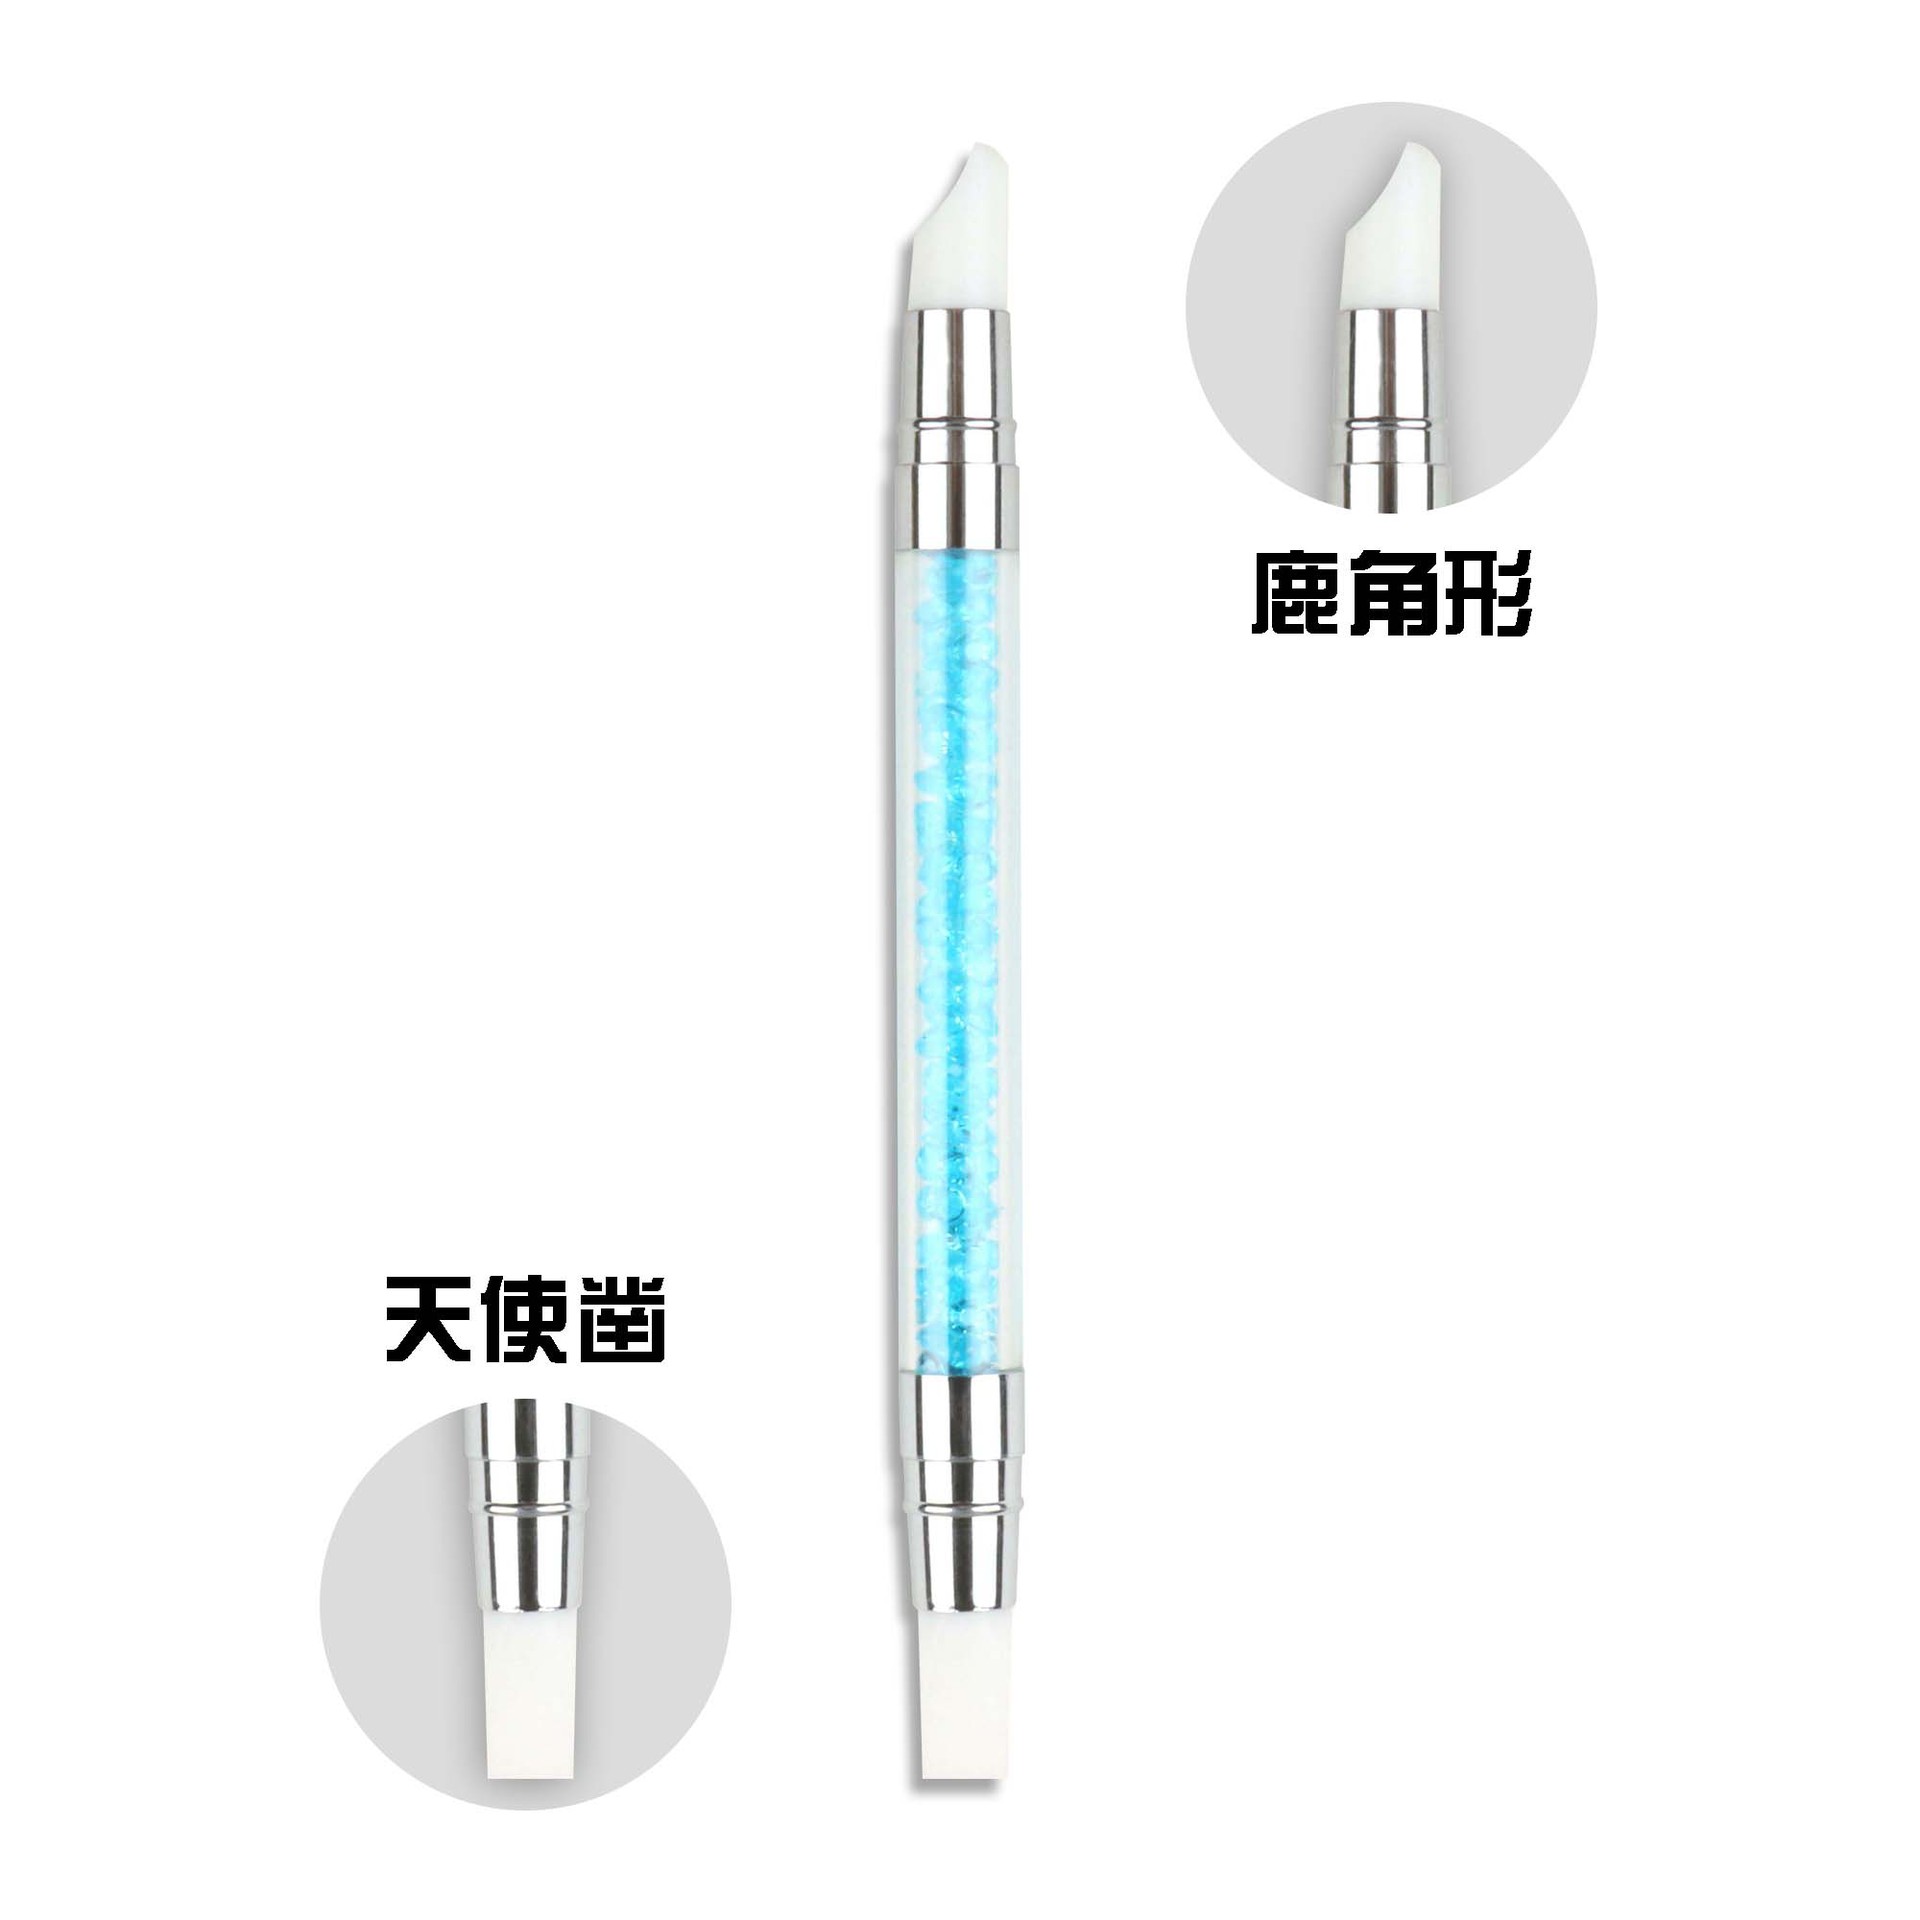 Nail Art Silicone Pen Double-Headed Embossing Pen Set Glue Head Pen Polymer Clay Tool Indentation